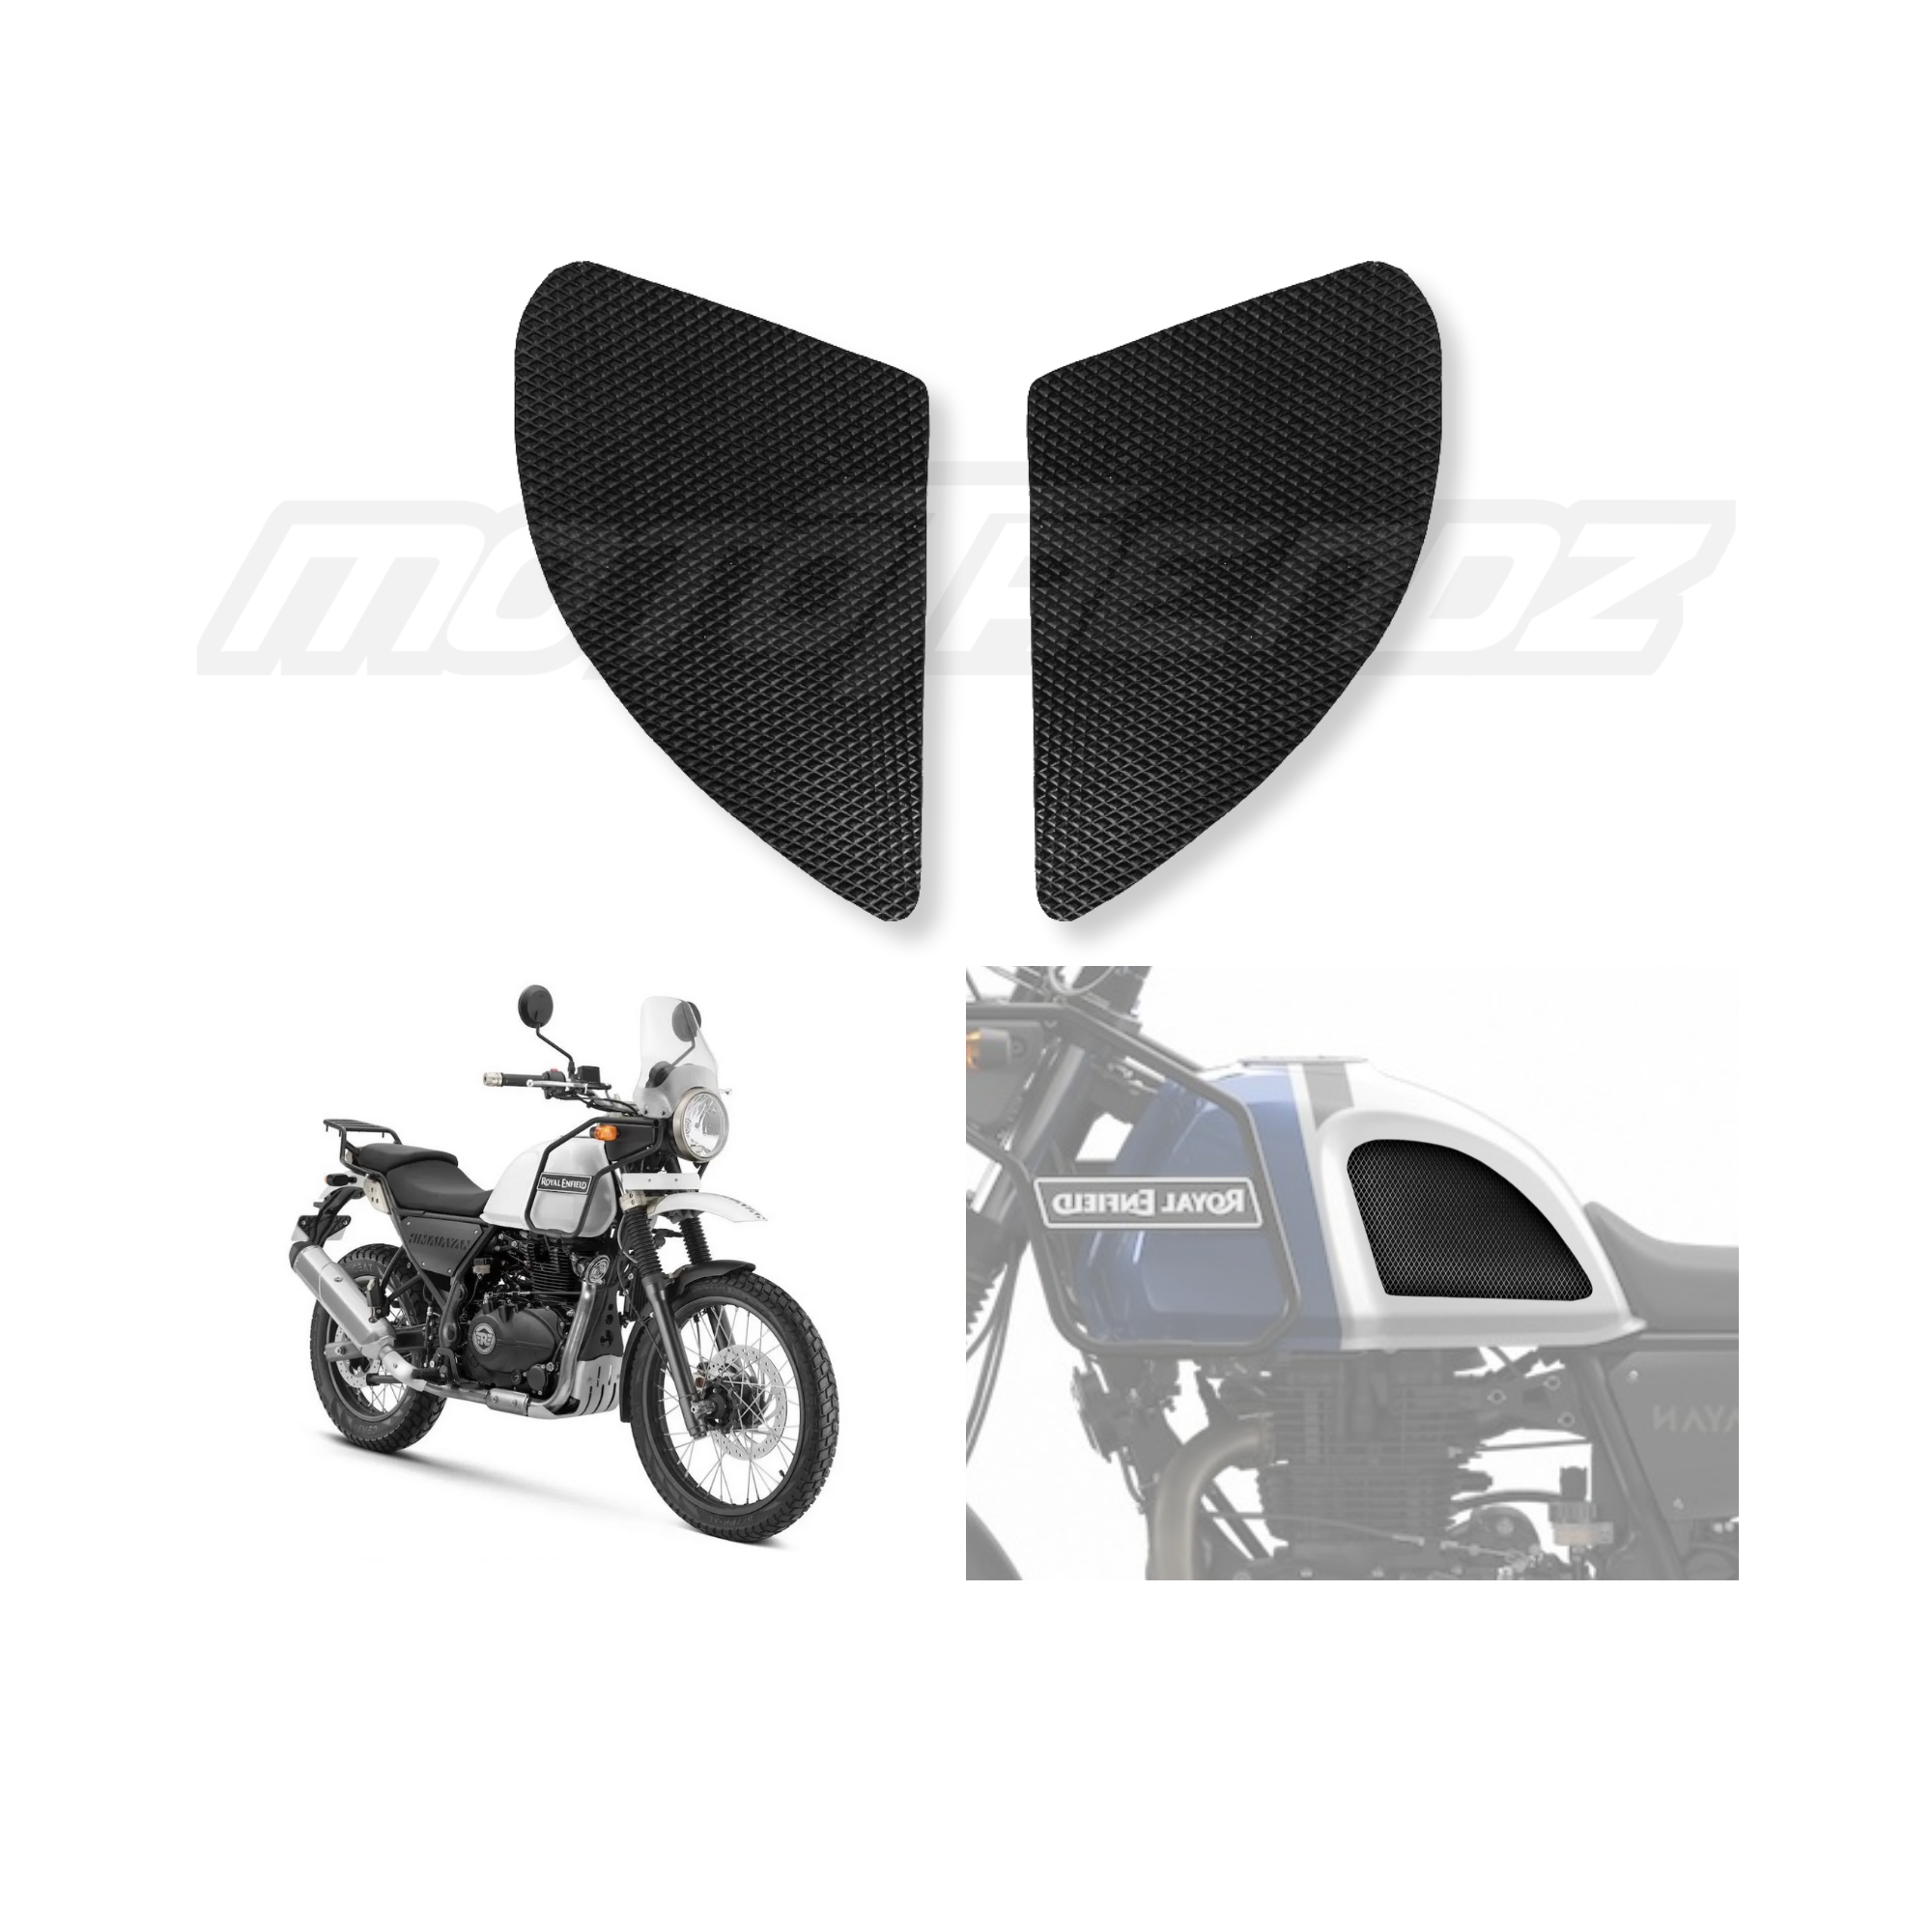 Uniware Leather Scratch Proof Petrol Tank Cover/Tank Bag Compatible for  Royal Enfield Classic 350/500,